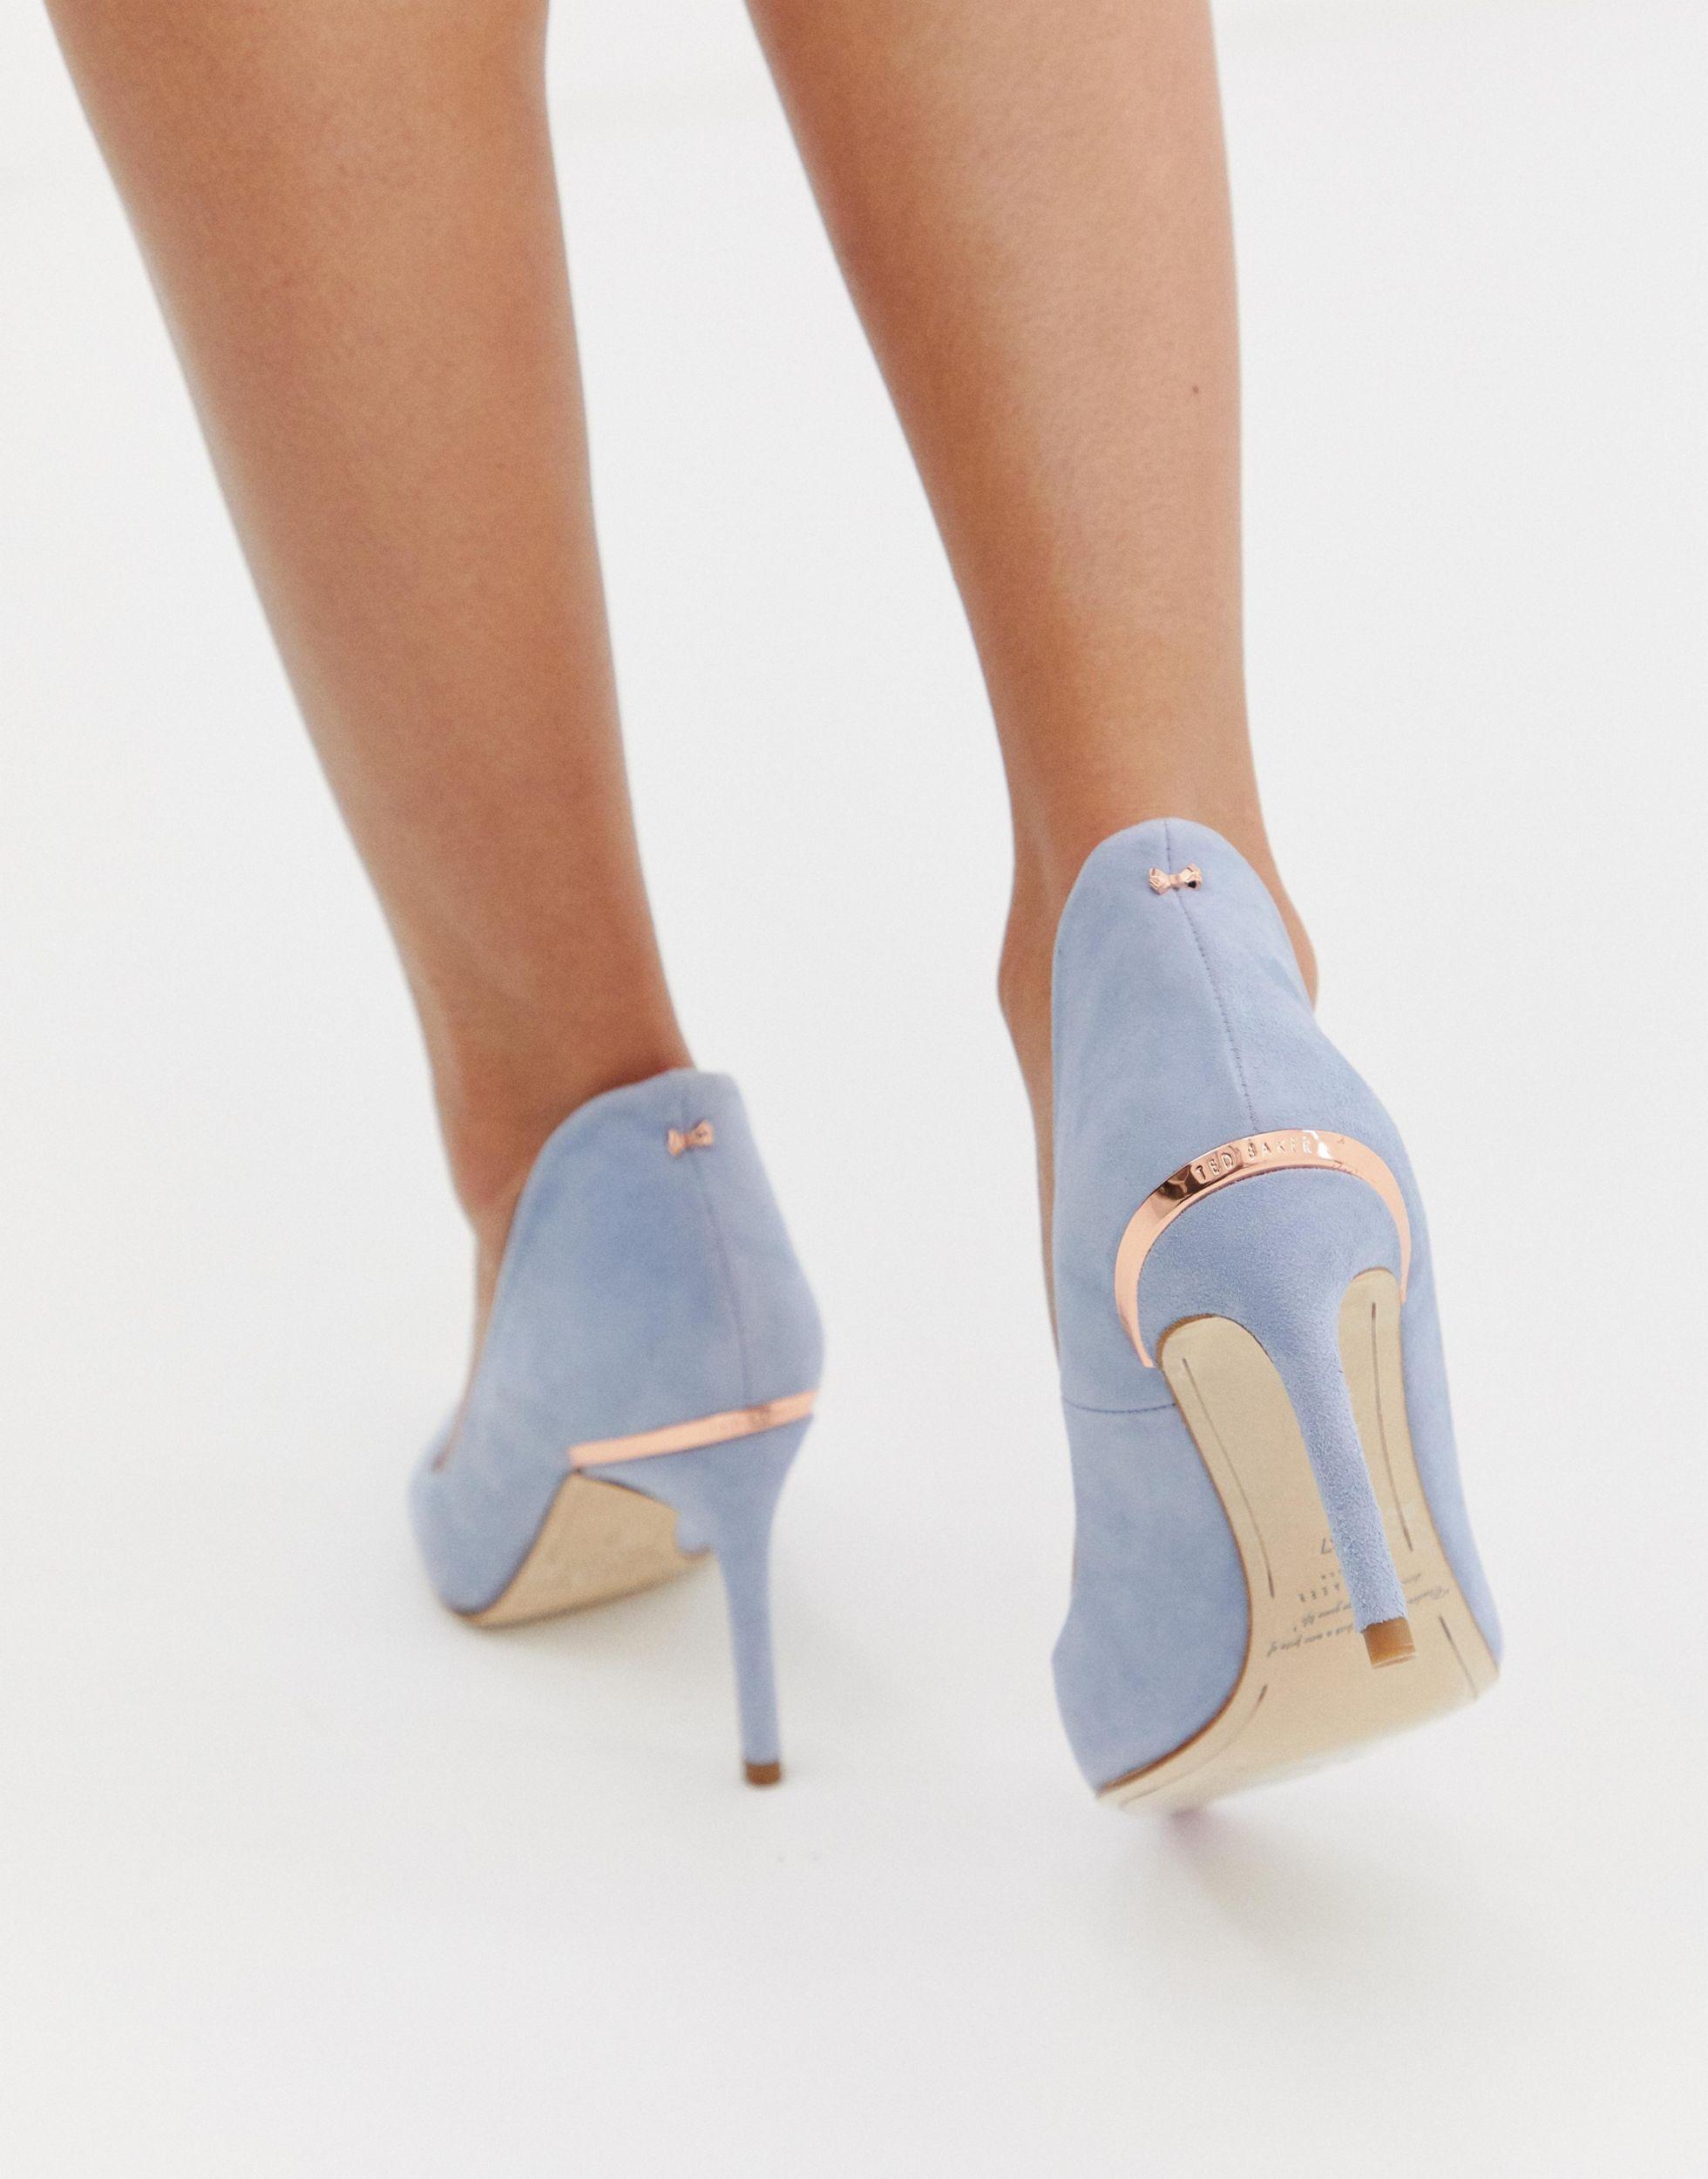 Ted Baker Suede Heeled Shoes in Blue | Lyst